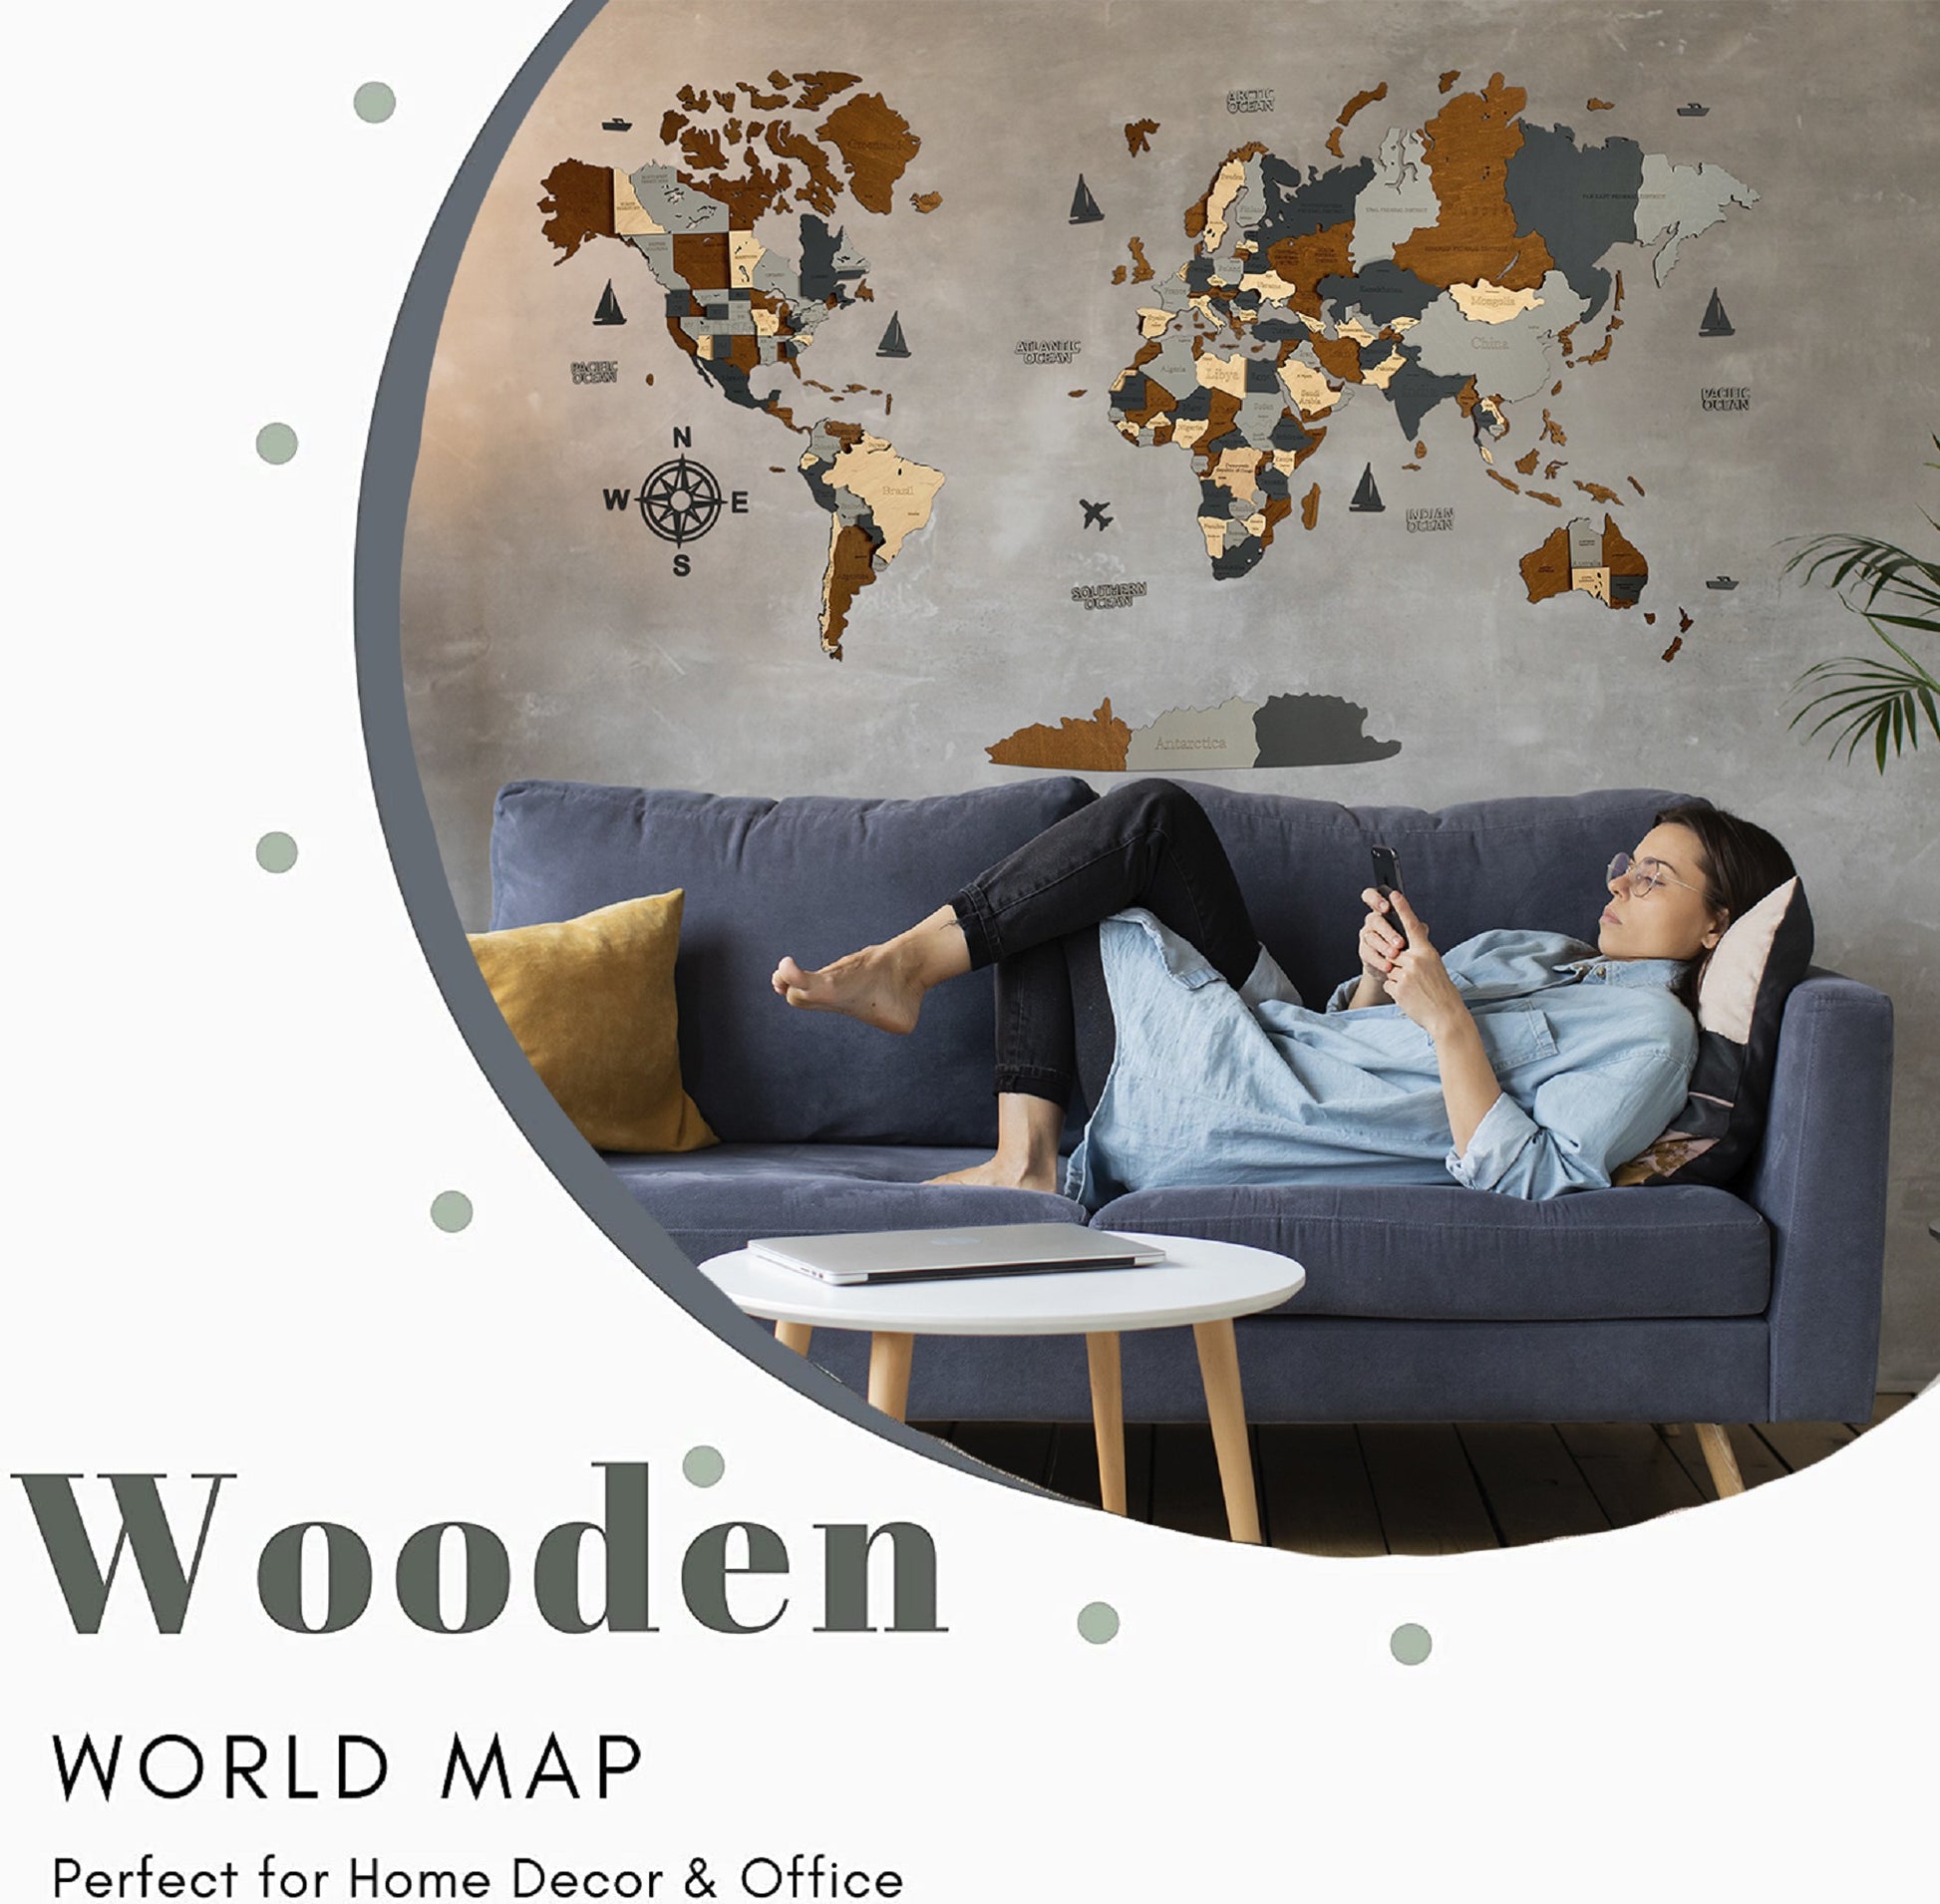 3D Wooden World Map Light from Enjoy The Wood ‣ Good Price, Reviews